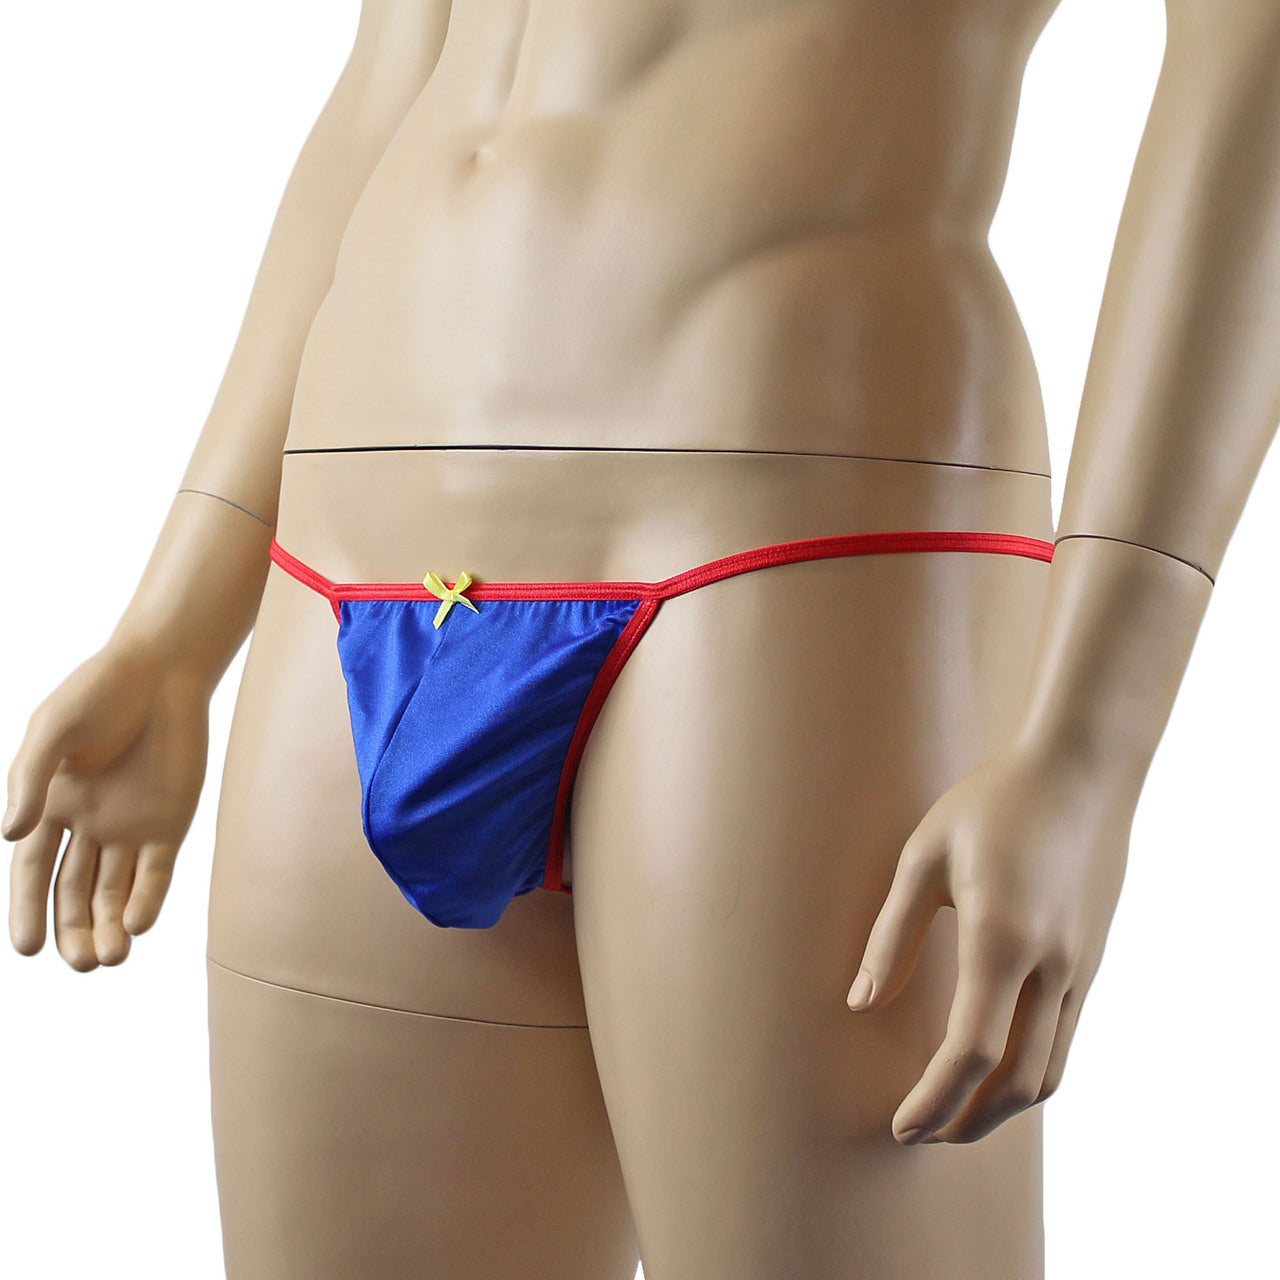 Mens Lingerie Colourful Stud G string with Bow Front (assorted colours)